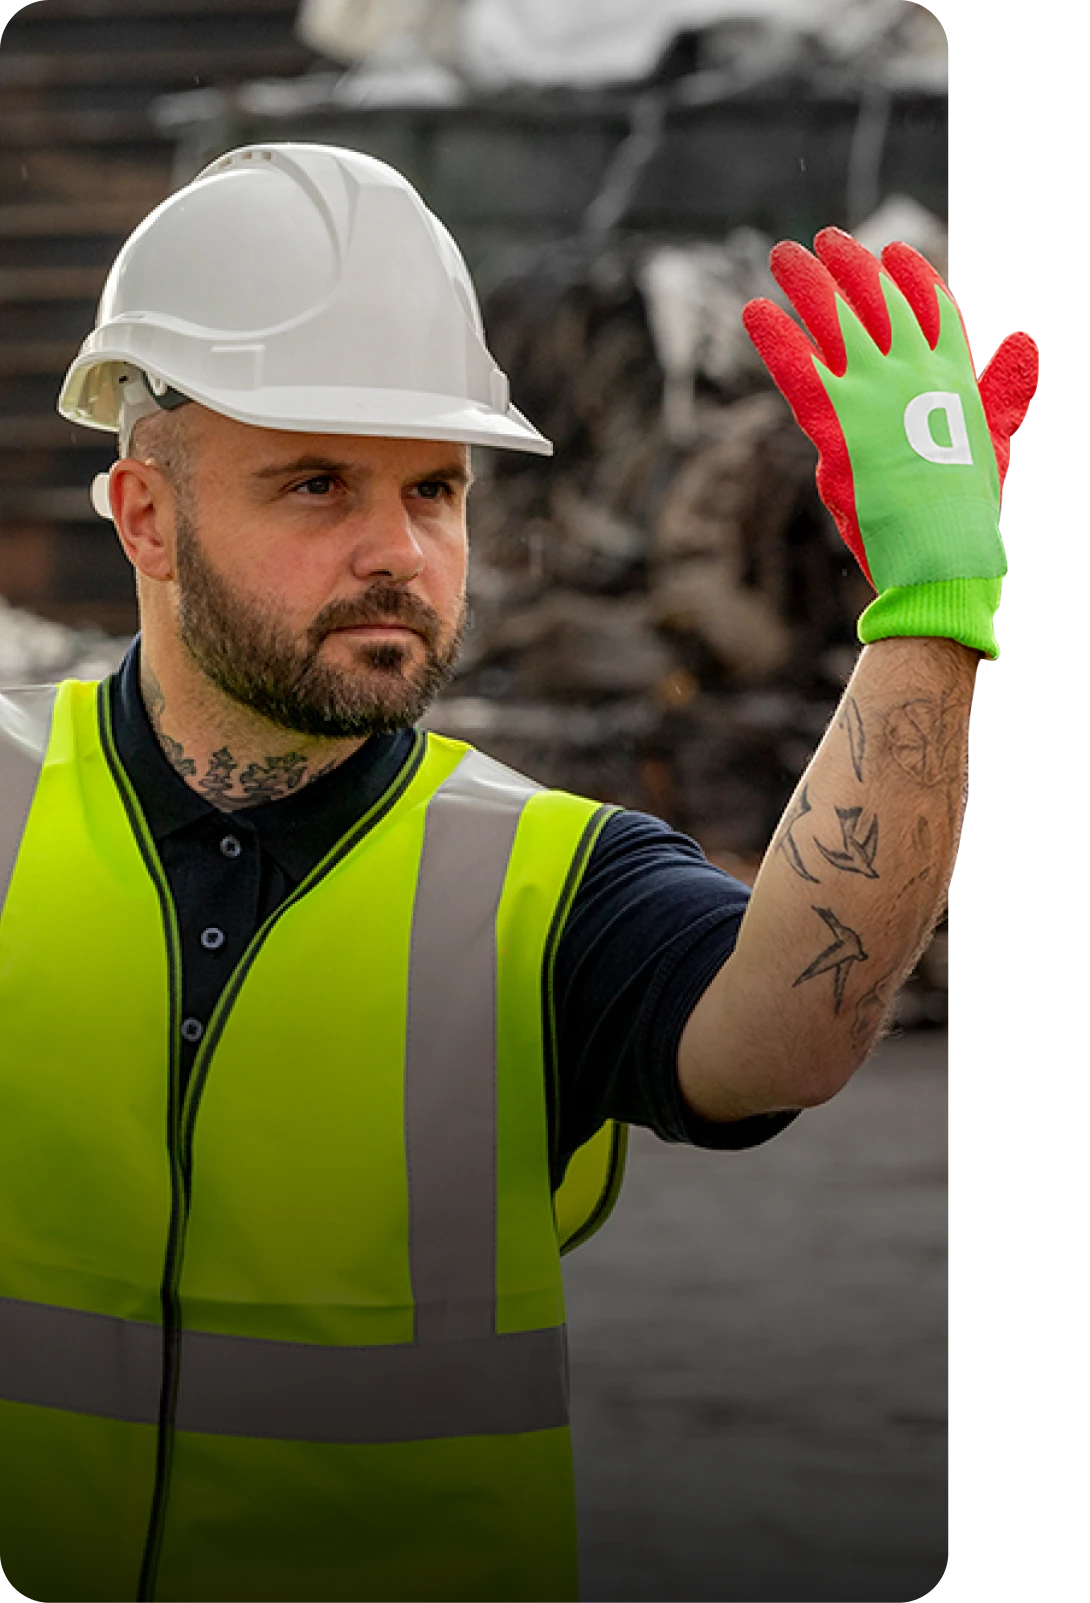 Social Media Marketing Agency showcases industry-tested safety gloves in promotional campaign.